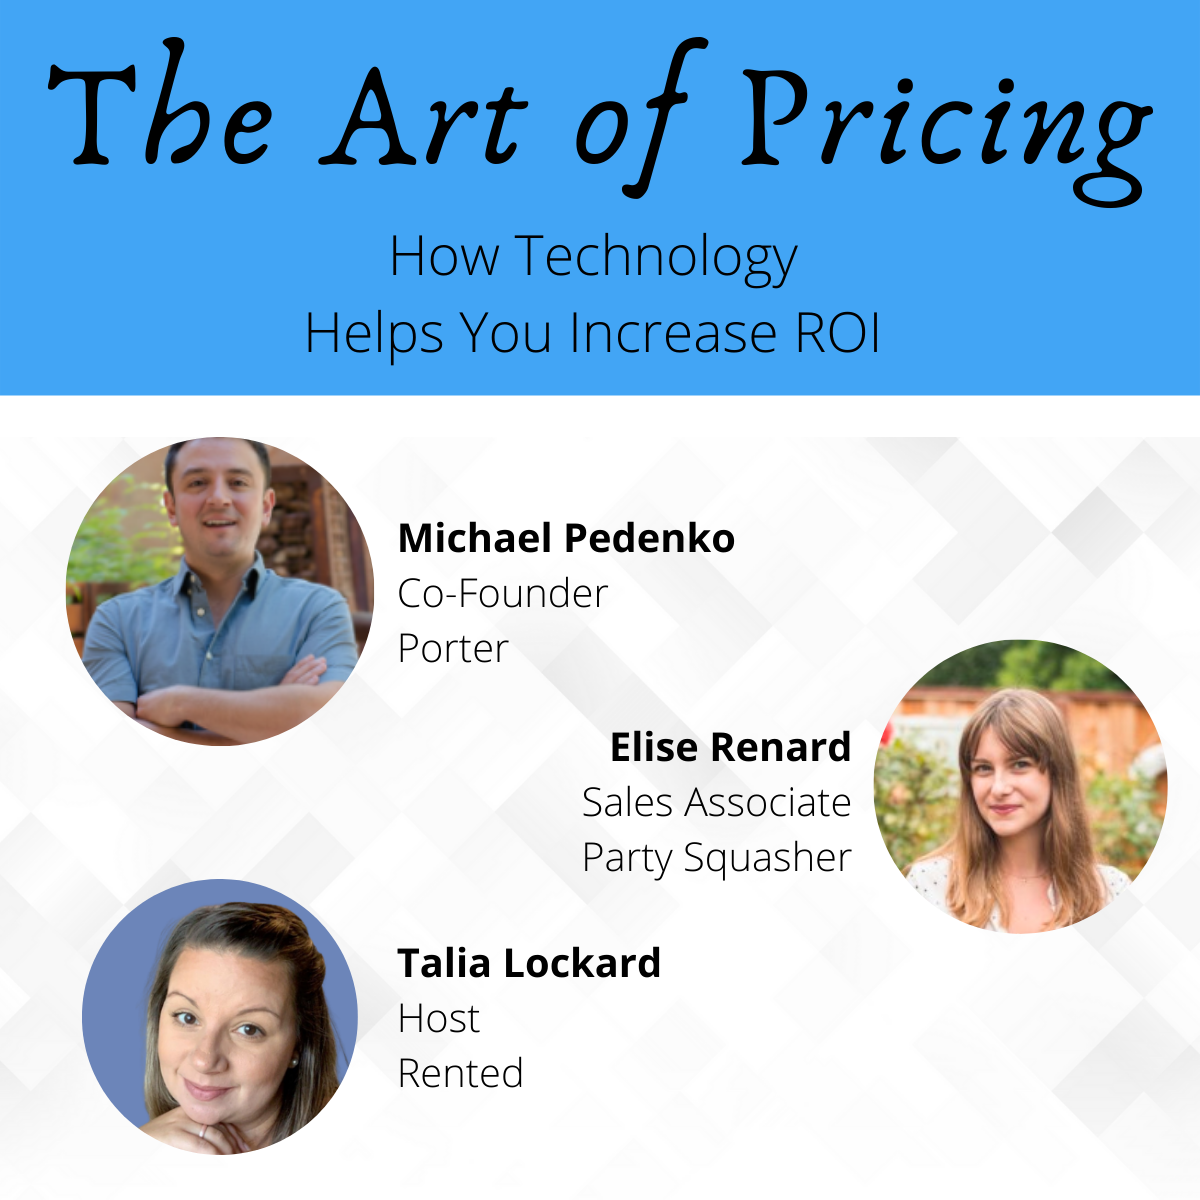 How Technology Helps you Increase ROI